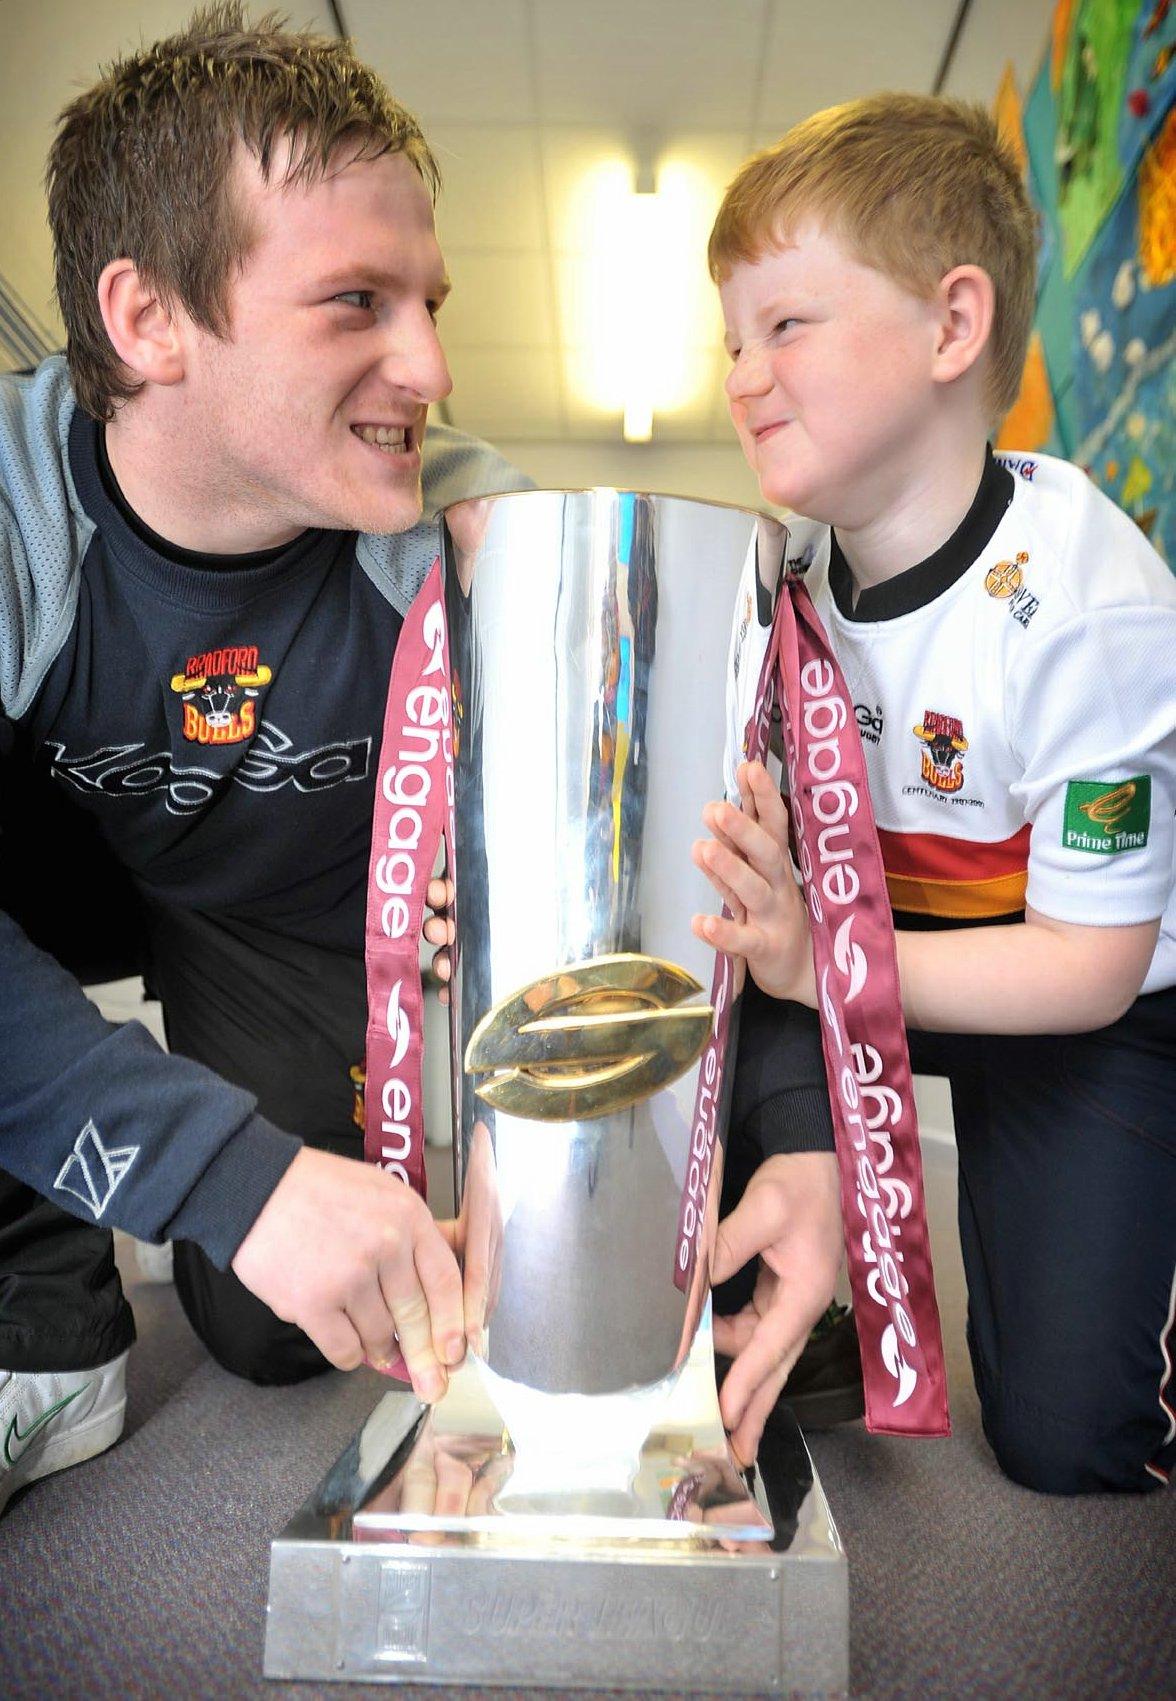 Pupils at Wibsey Primary showed Bulls captain Paul Deacon and fellow player Matt Brooks just how it’s done by hoisting high the Super League trophy. Pupil Jamie Ingham squares up to Bulls star Matt Brooks.